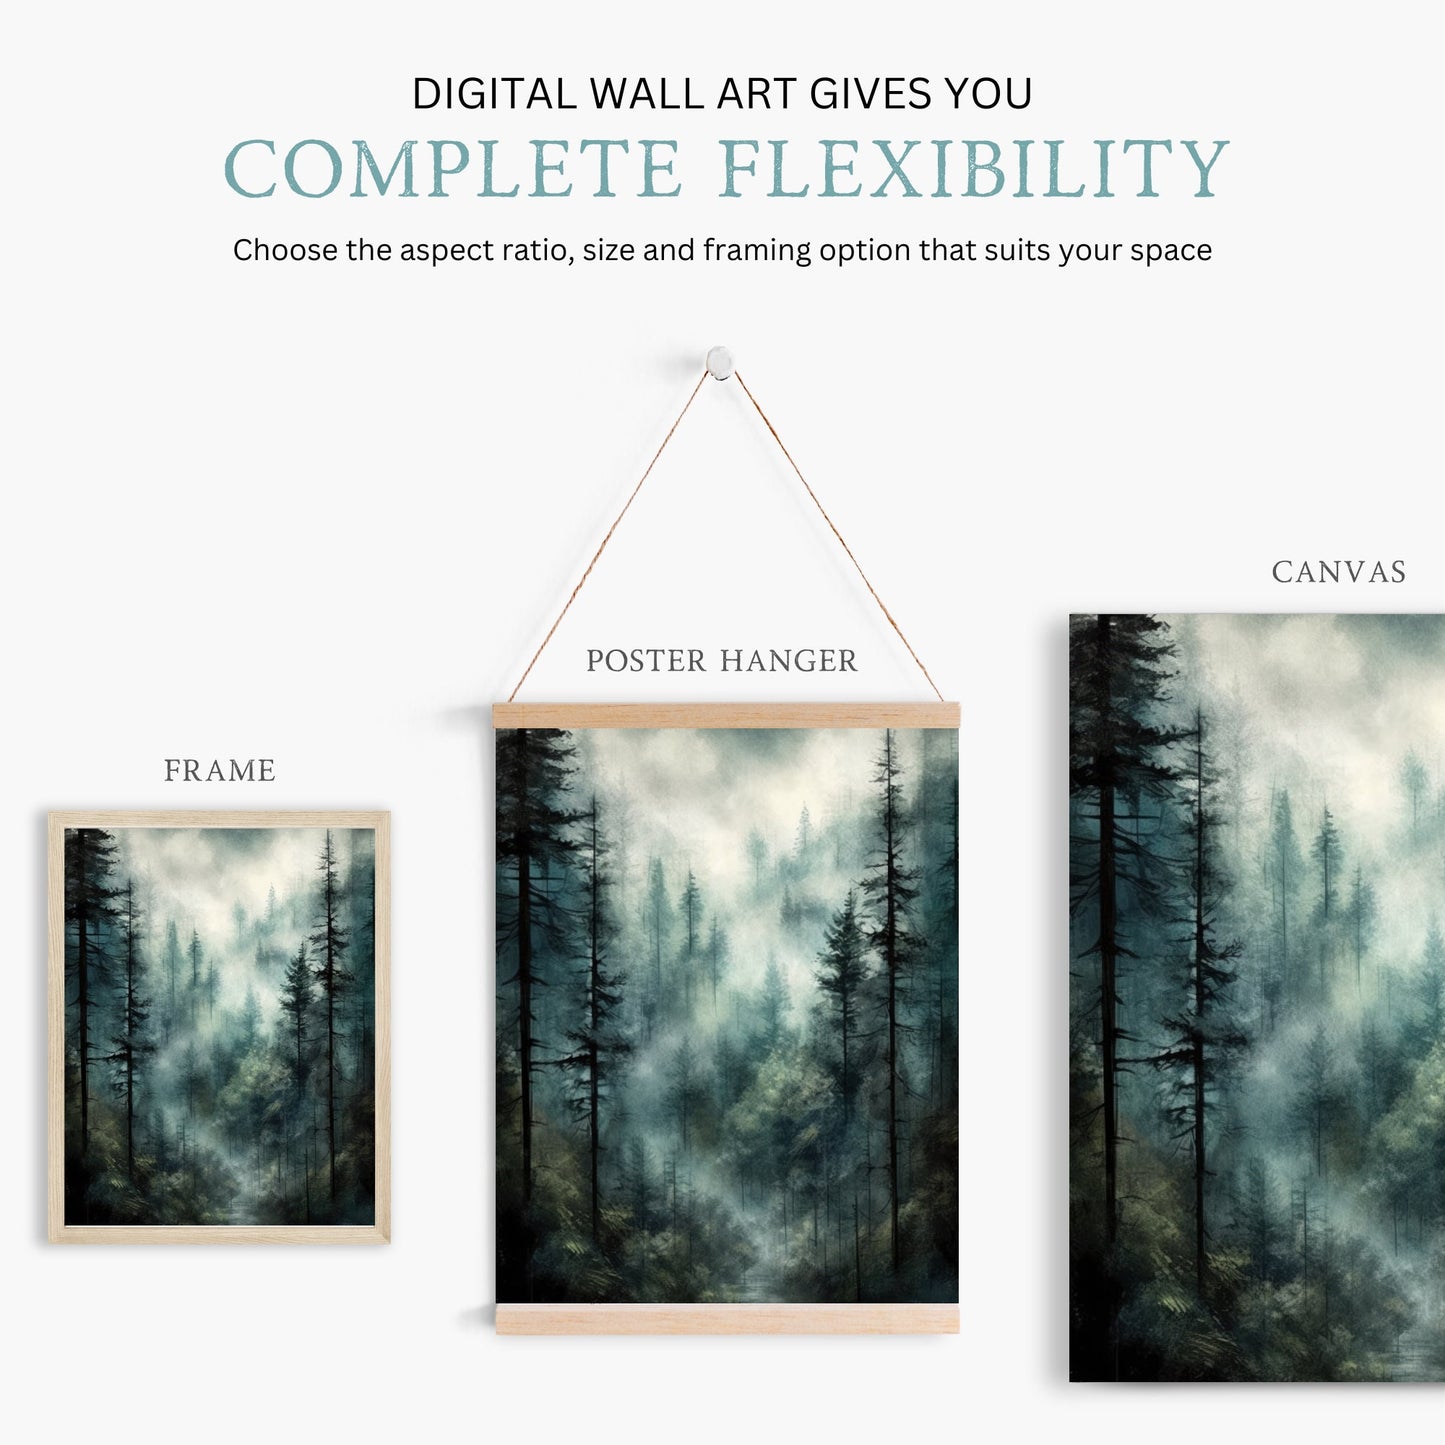 Watercolor Forest Art, Watercolor Landscape Painting, Set of 2, Moody Wall Decor, Vintage Nature Print, Green Digital Printable Art